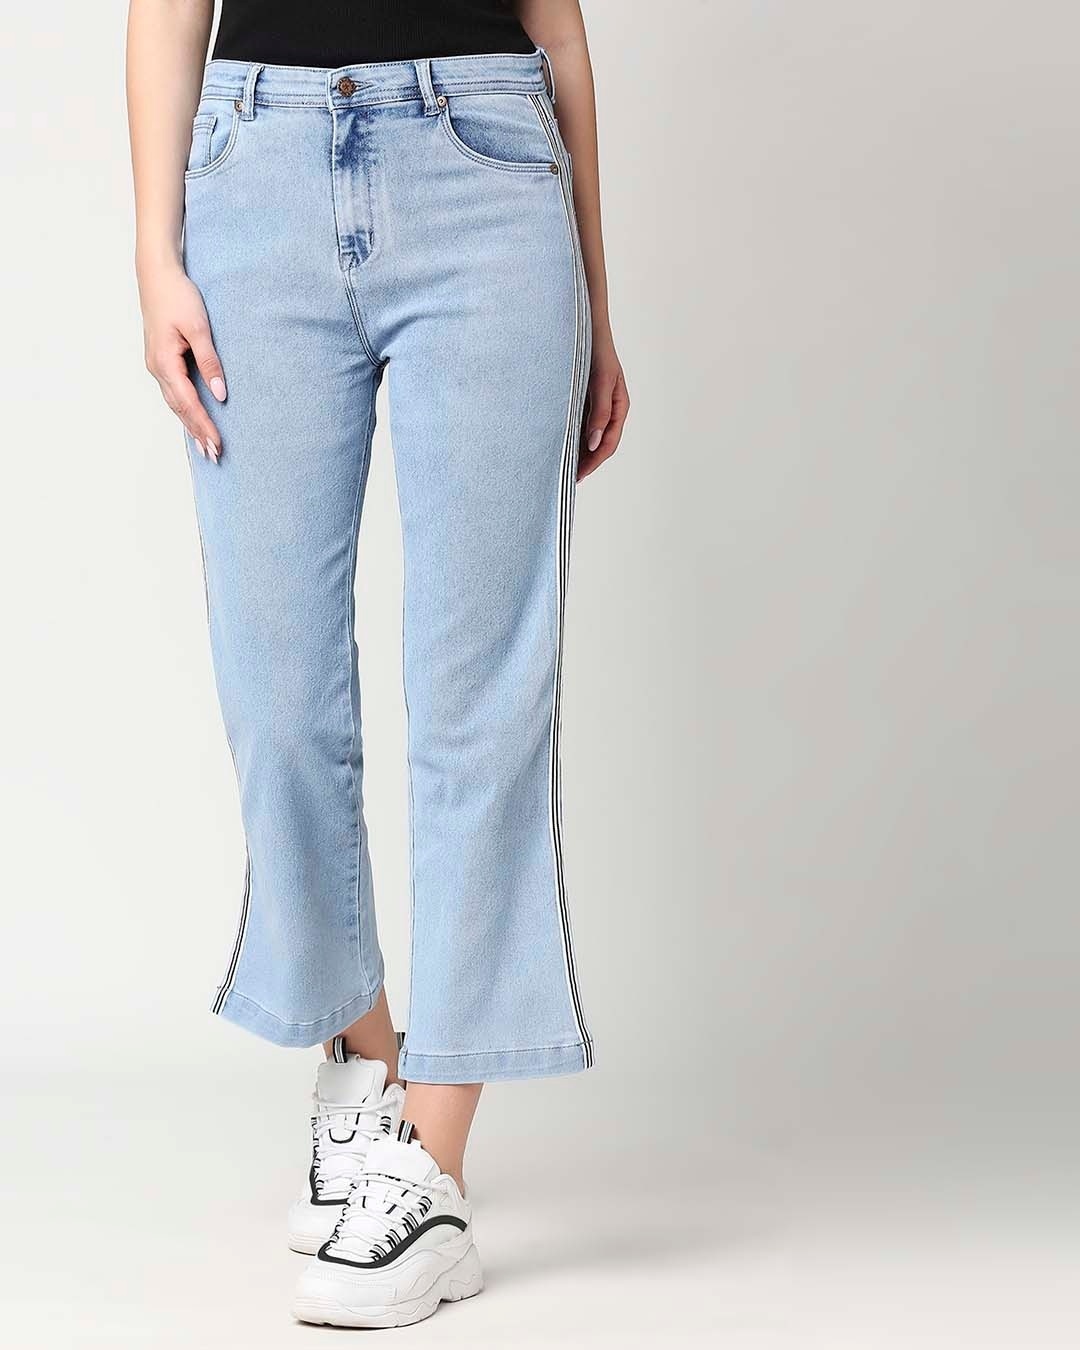 Heavy Washed Fade Denim Loose Pants With Tassel Detail No/Fair Duty Mens  Streetwear Casual Distressed Jeans Women From Zepplin, $91.35 | DHgate.Com